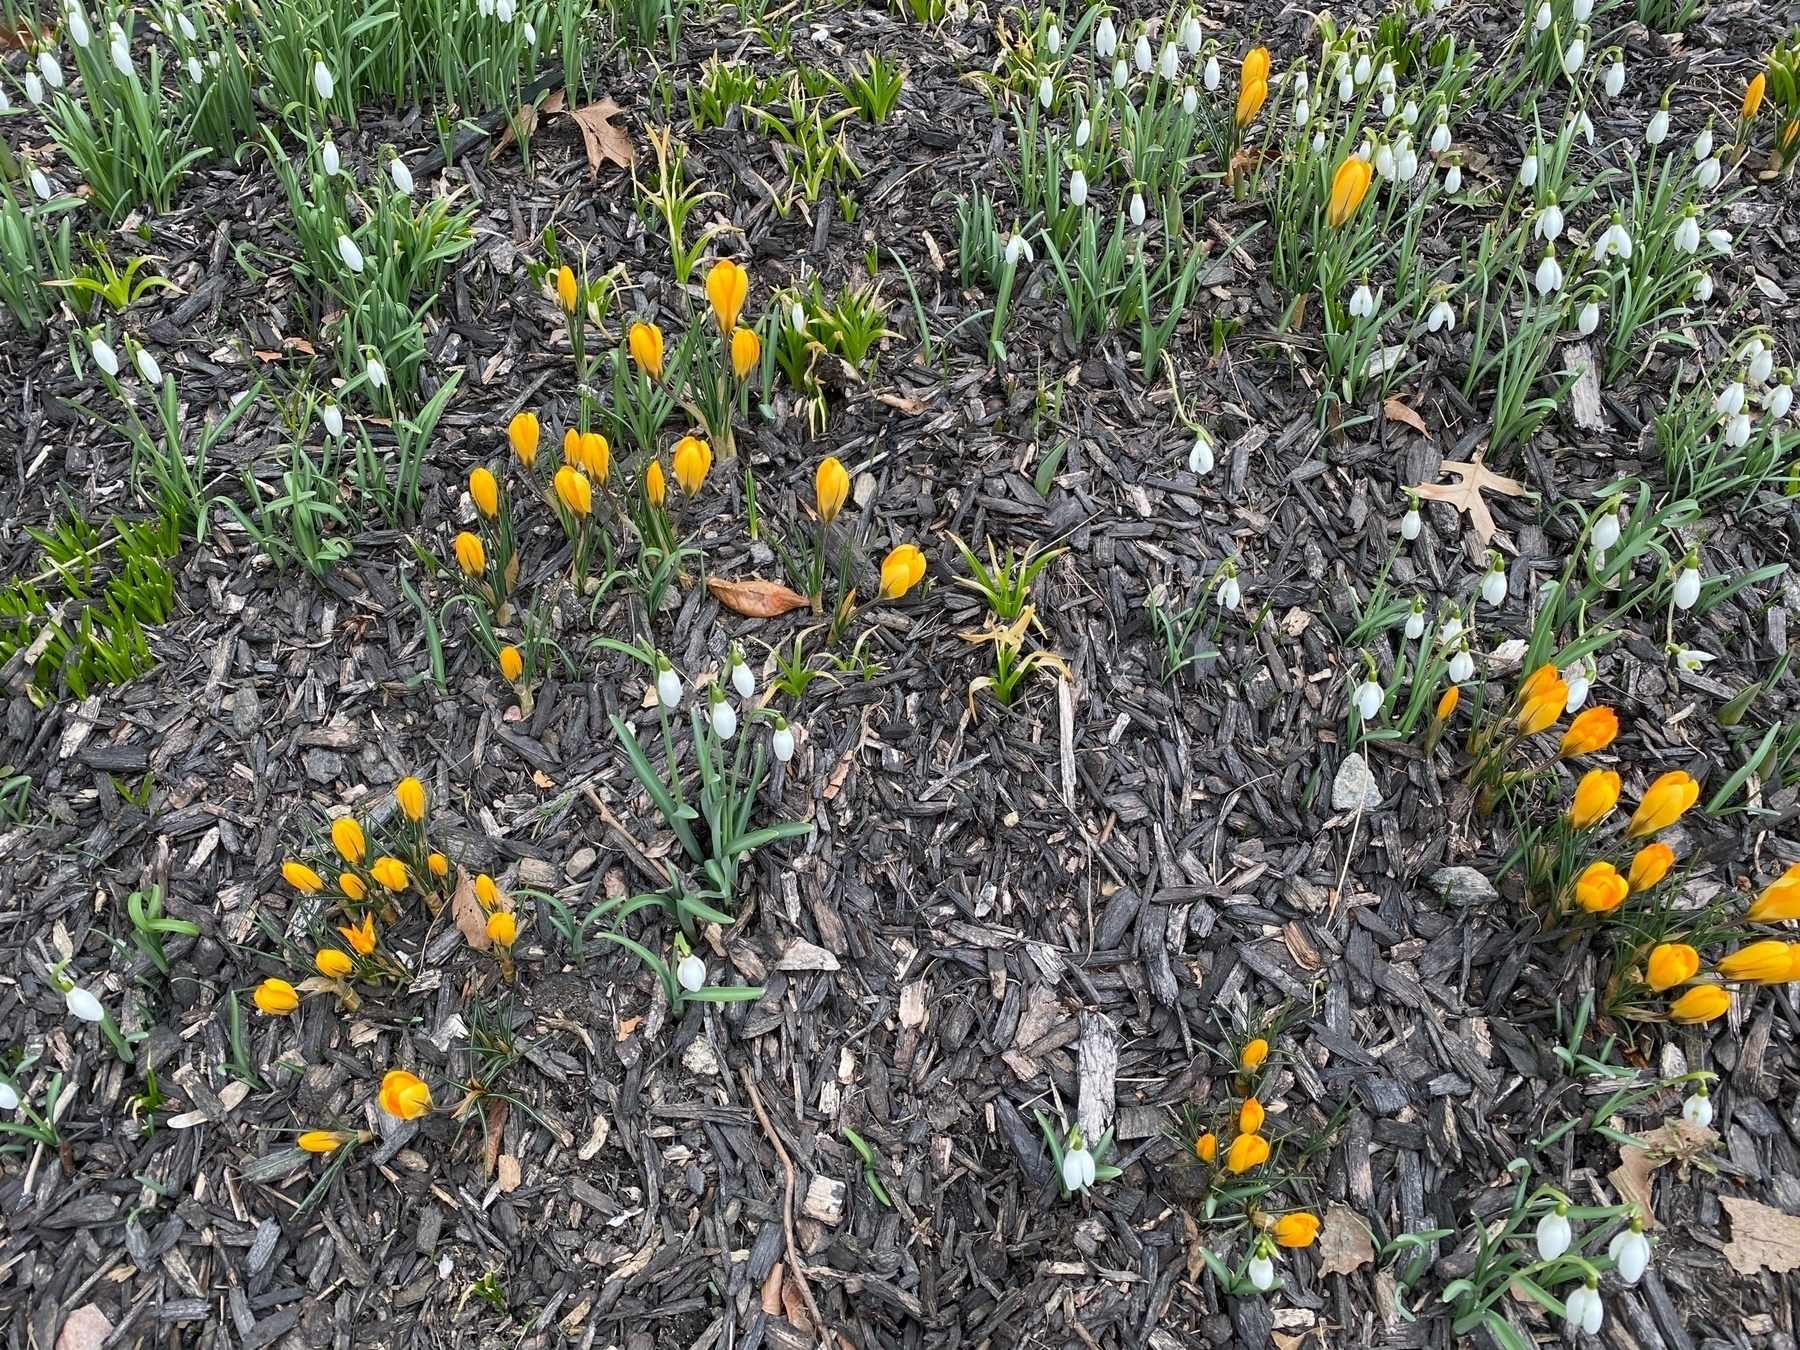 Snowdrops and crocuses growing through mulch.